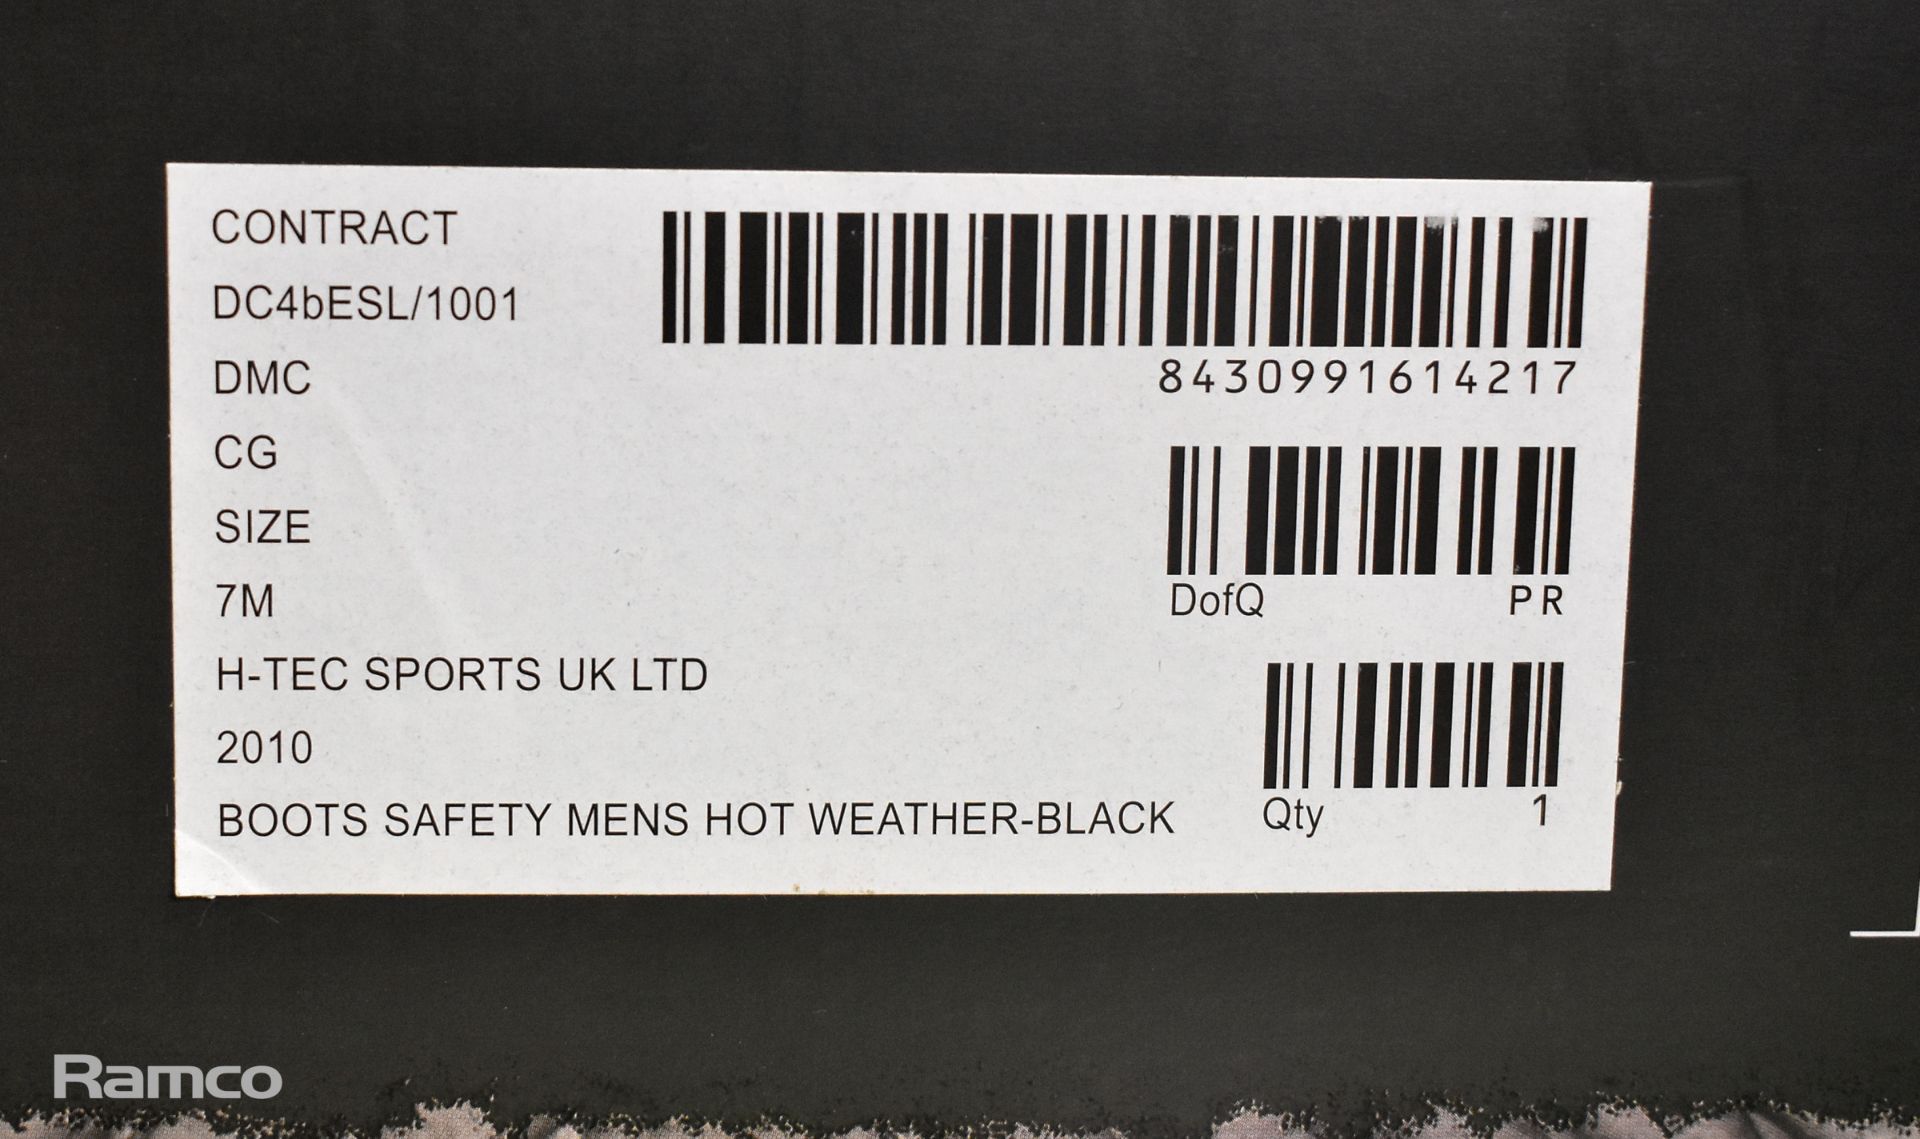 9x pairs of Magnum hot weather boots - Size 7M - Image 6 of 6